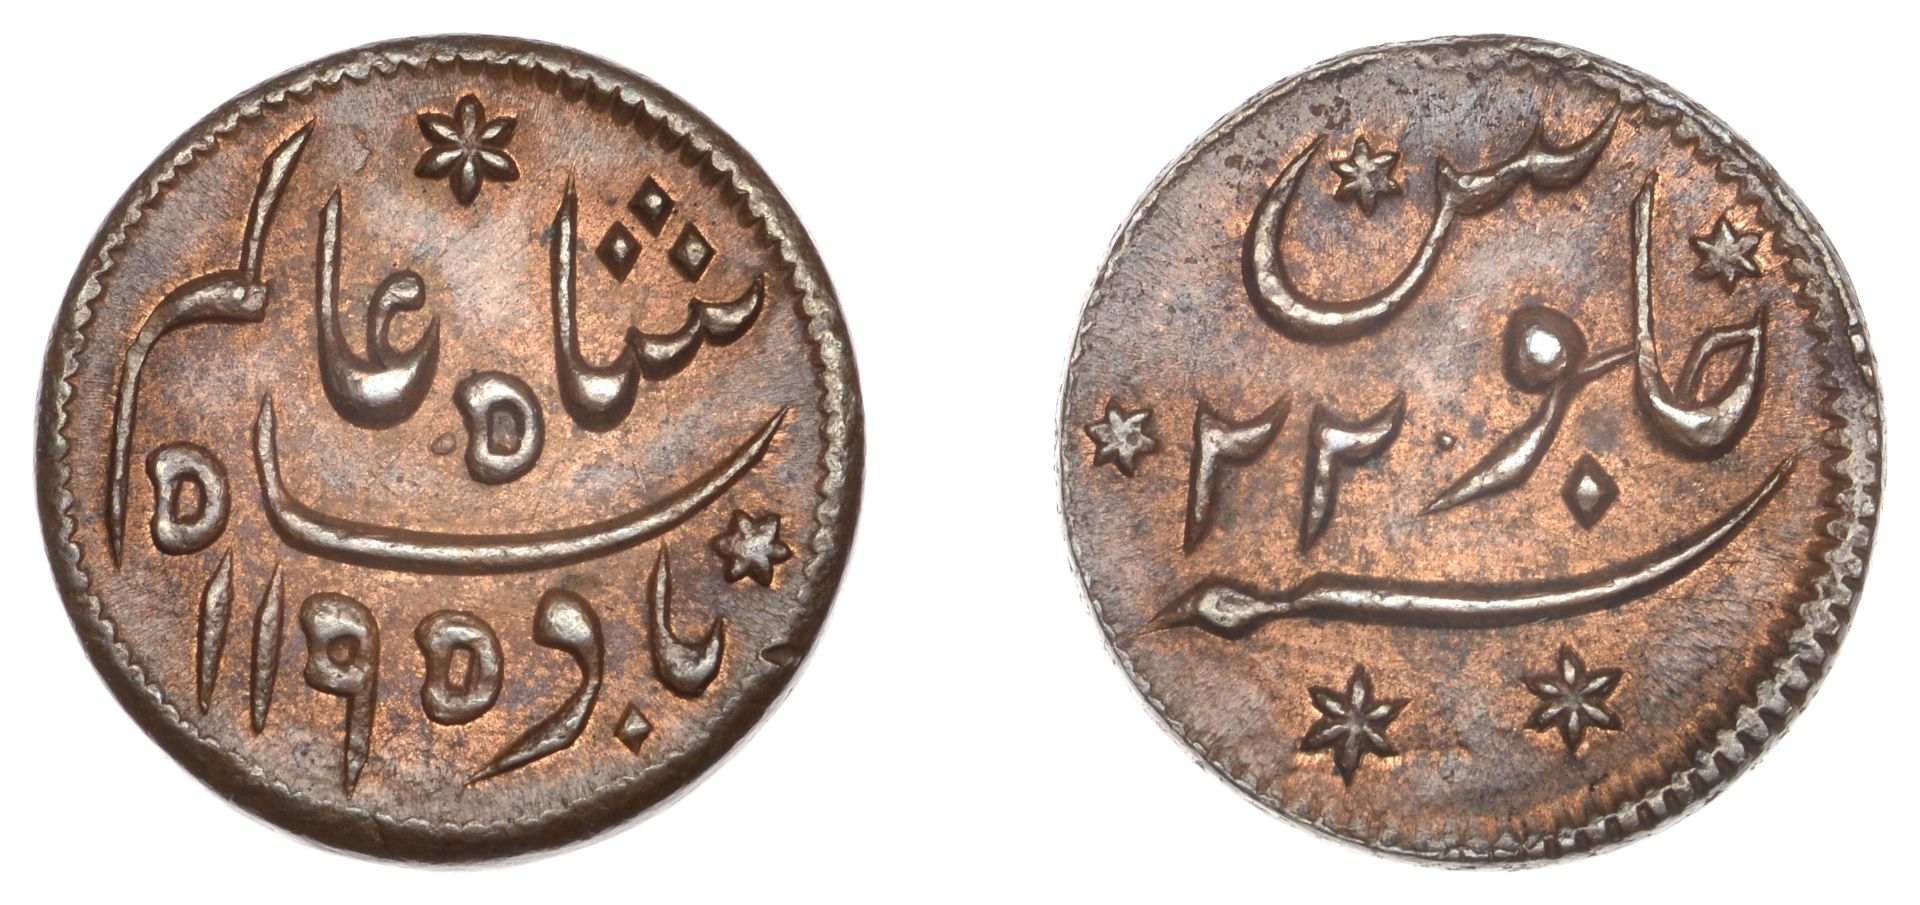 East India Company, Bengal Presidency, Pulta mint: Prinsep's coinage, copper Nim Fulus or Ei...